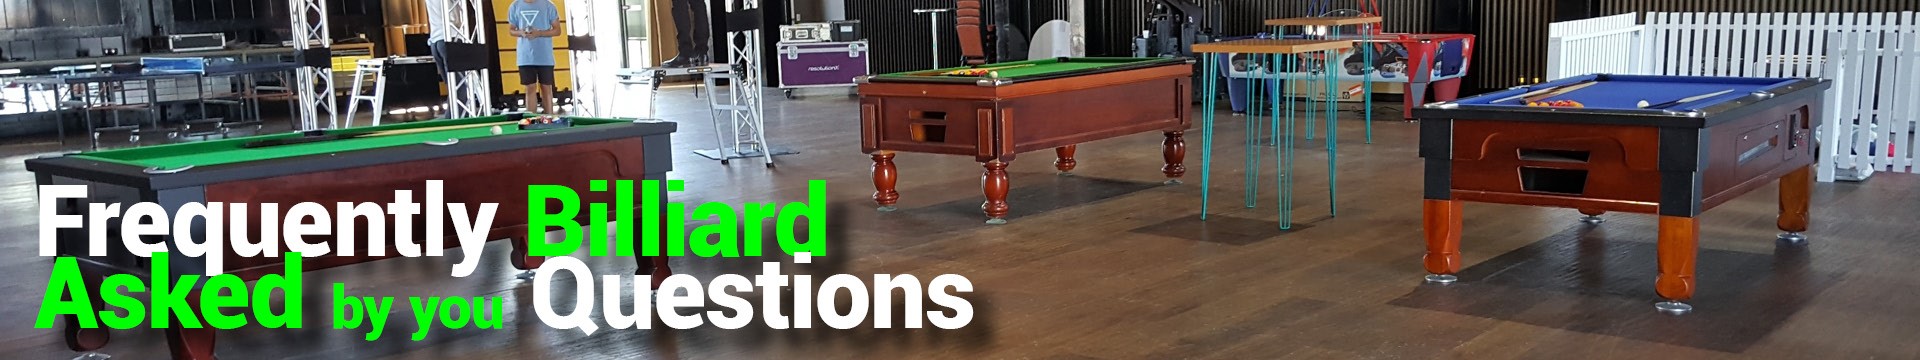 Pool Snooker Biliard Products 017